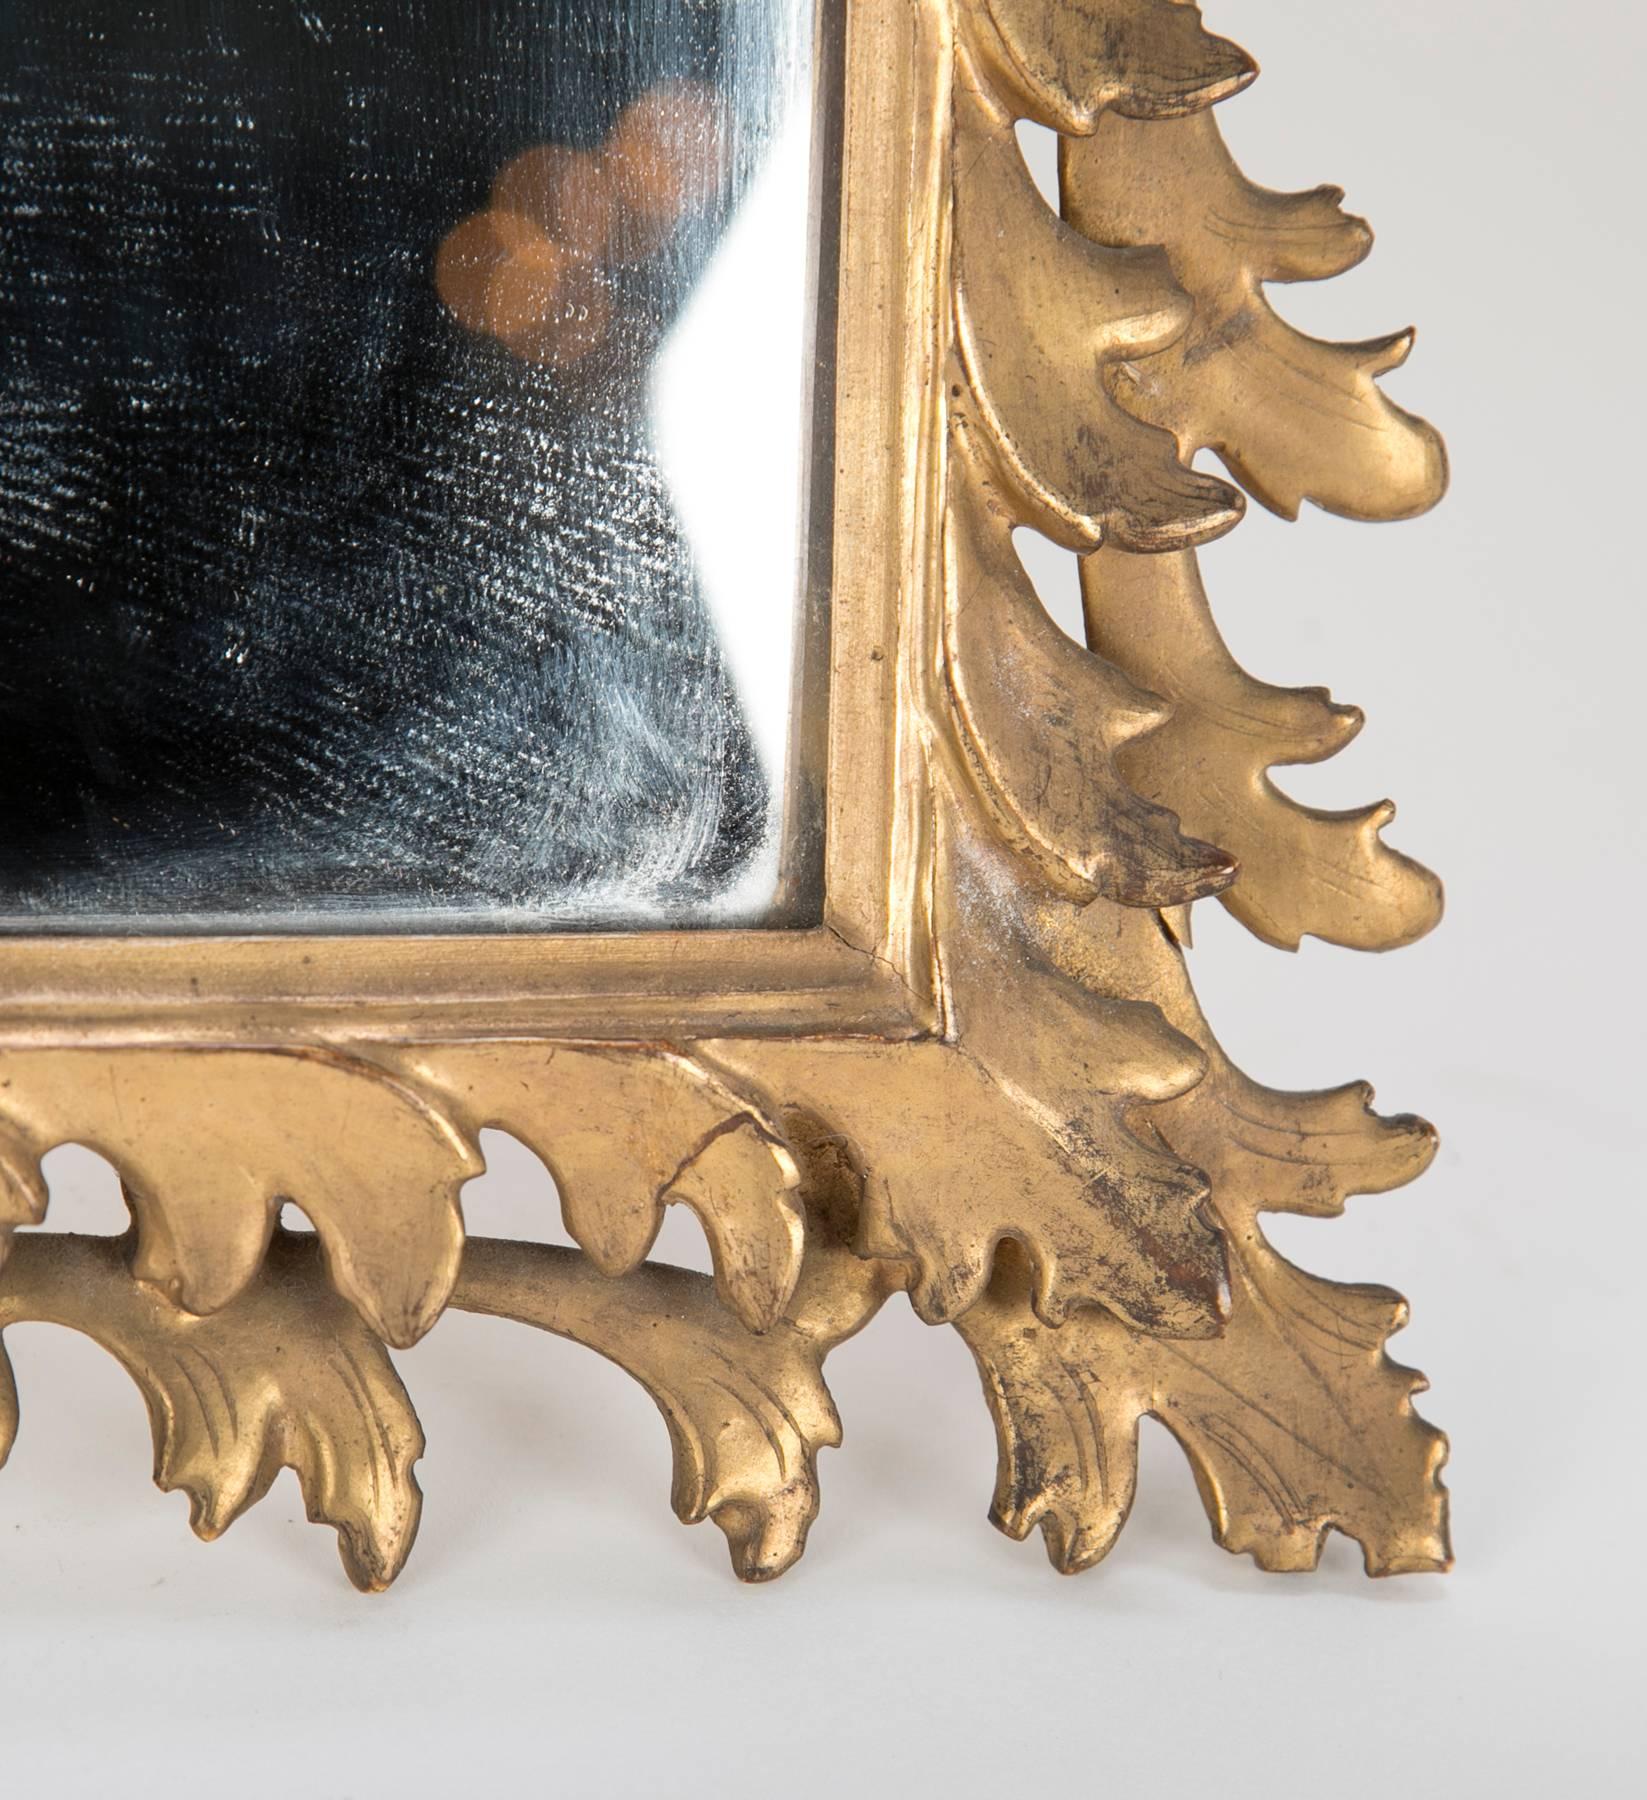 Italian Rococo Giltwood Tabletop Vainty Mirror In Excellent Condition For Sale In Stamford, CT